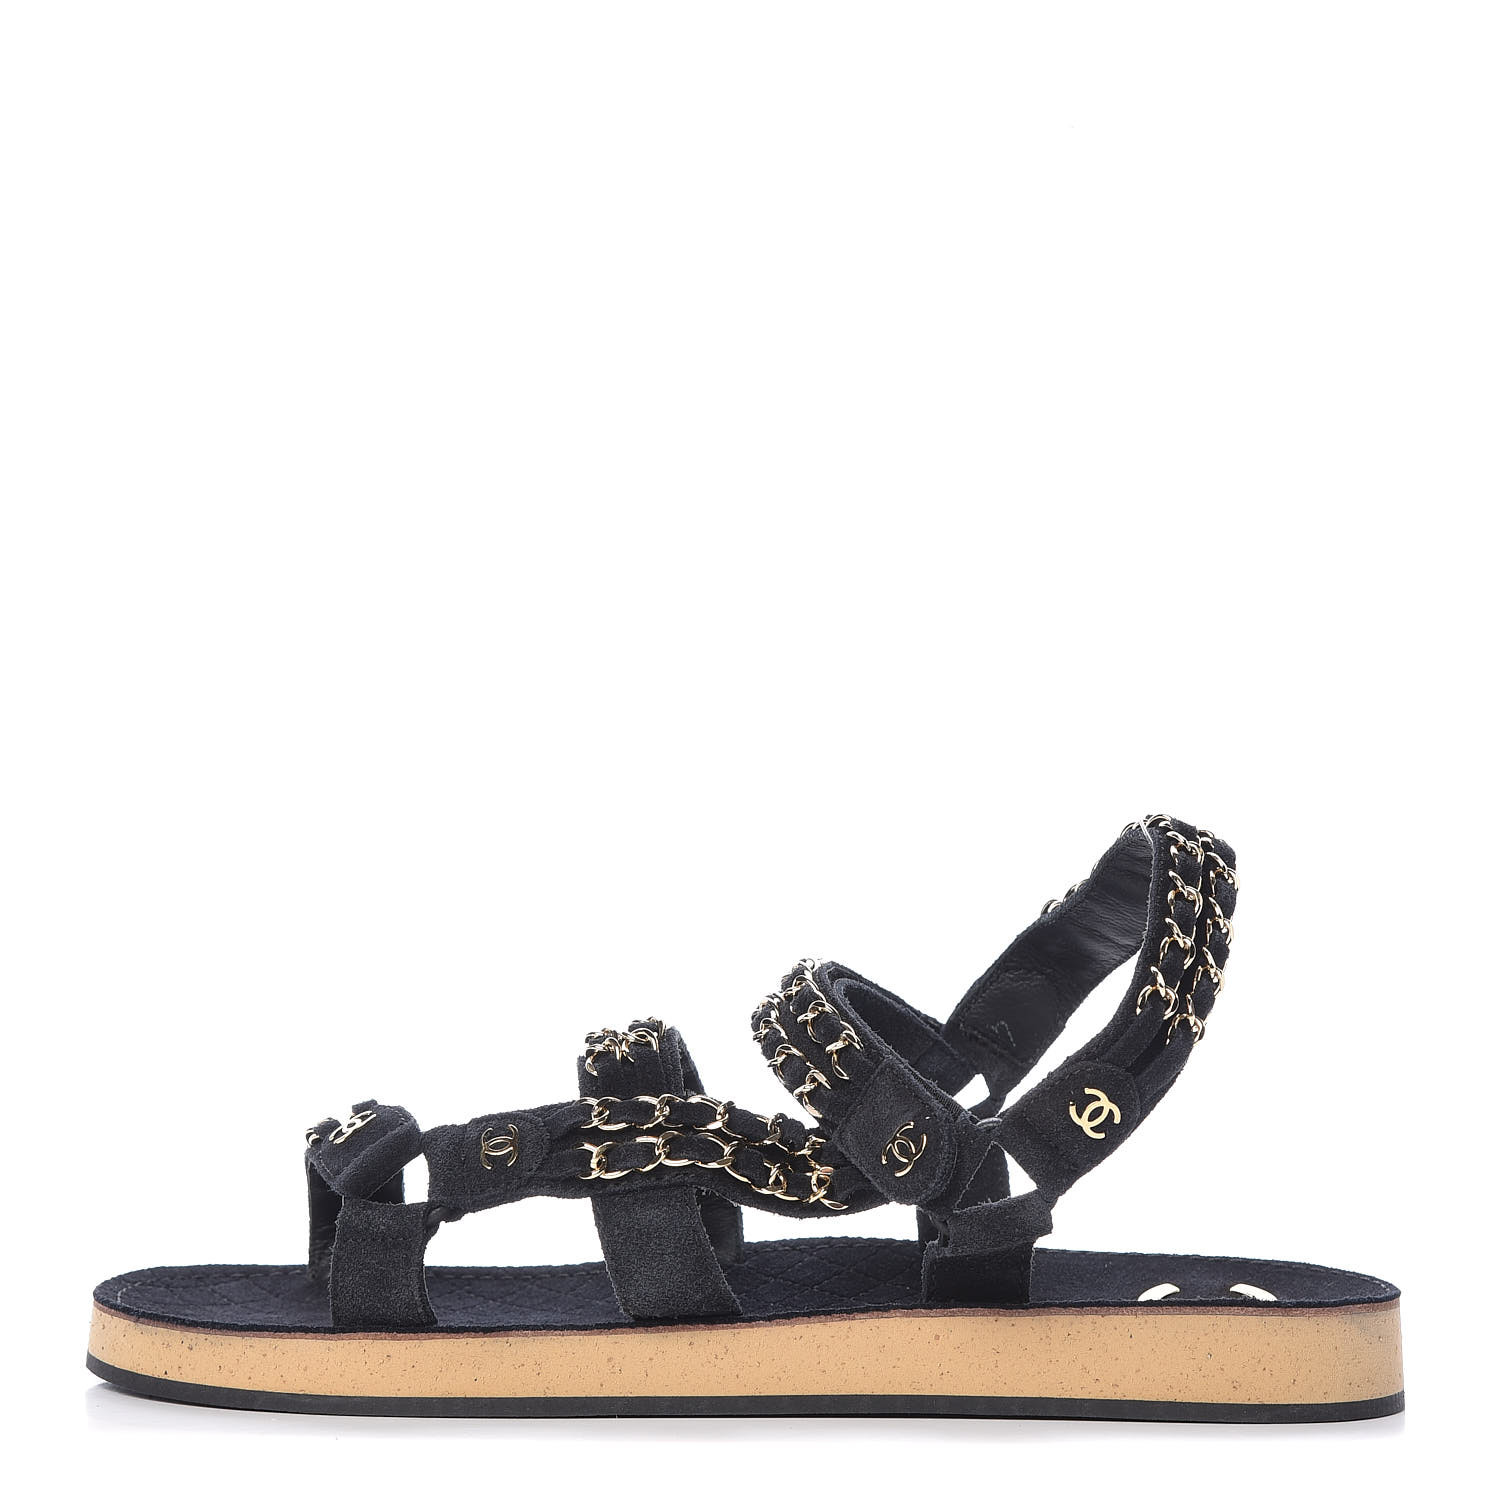 CHANEL Suede Chain Flat Sandals 41 